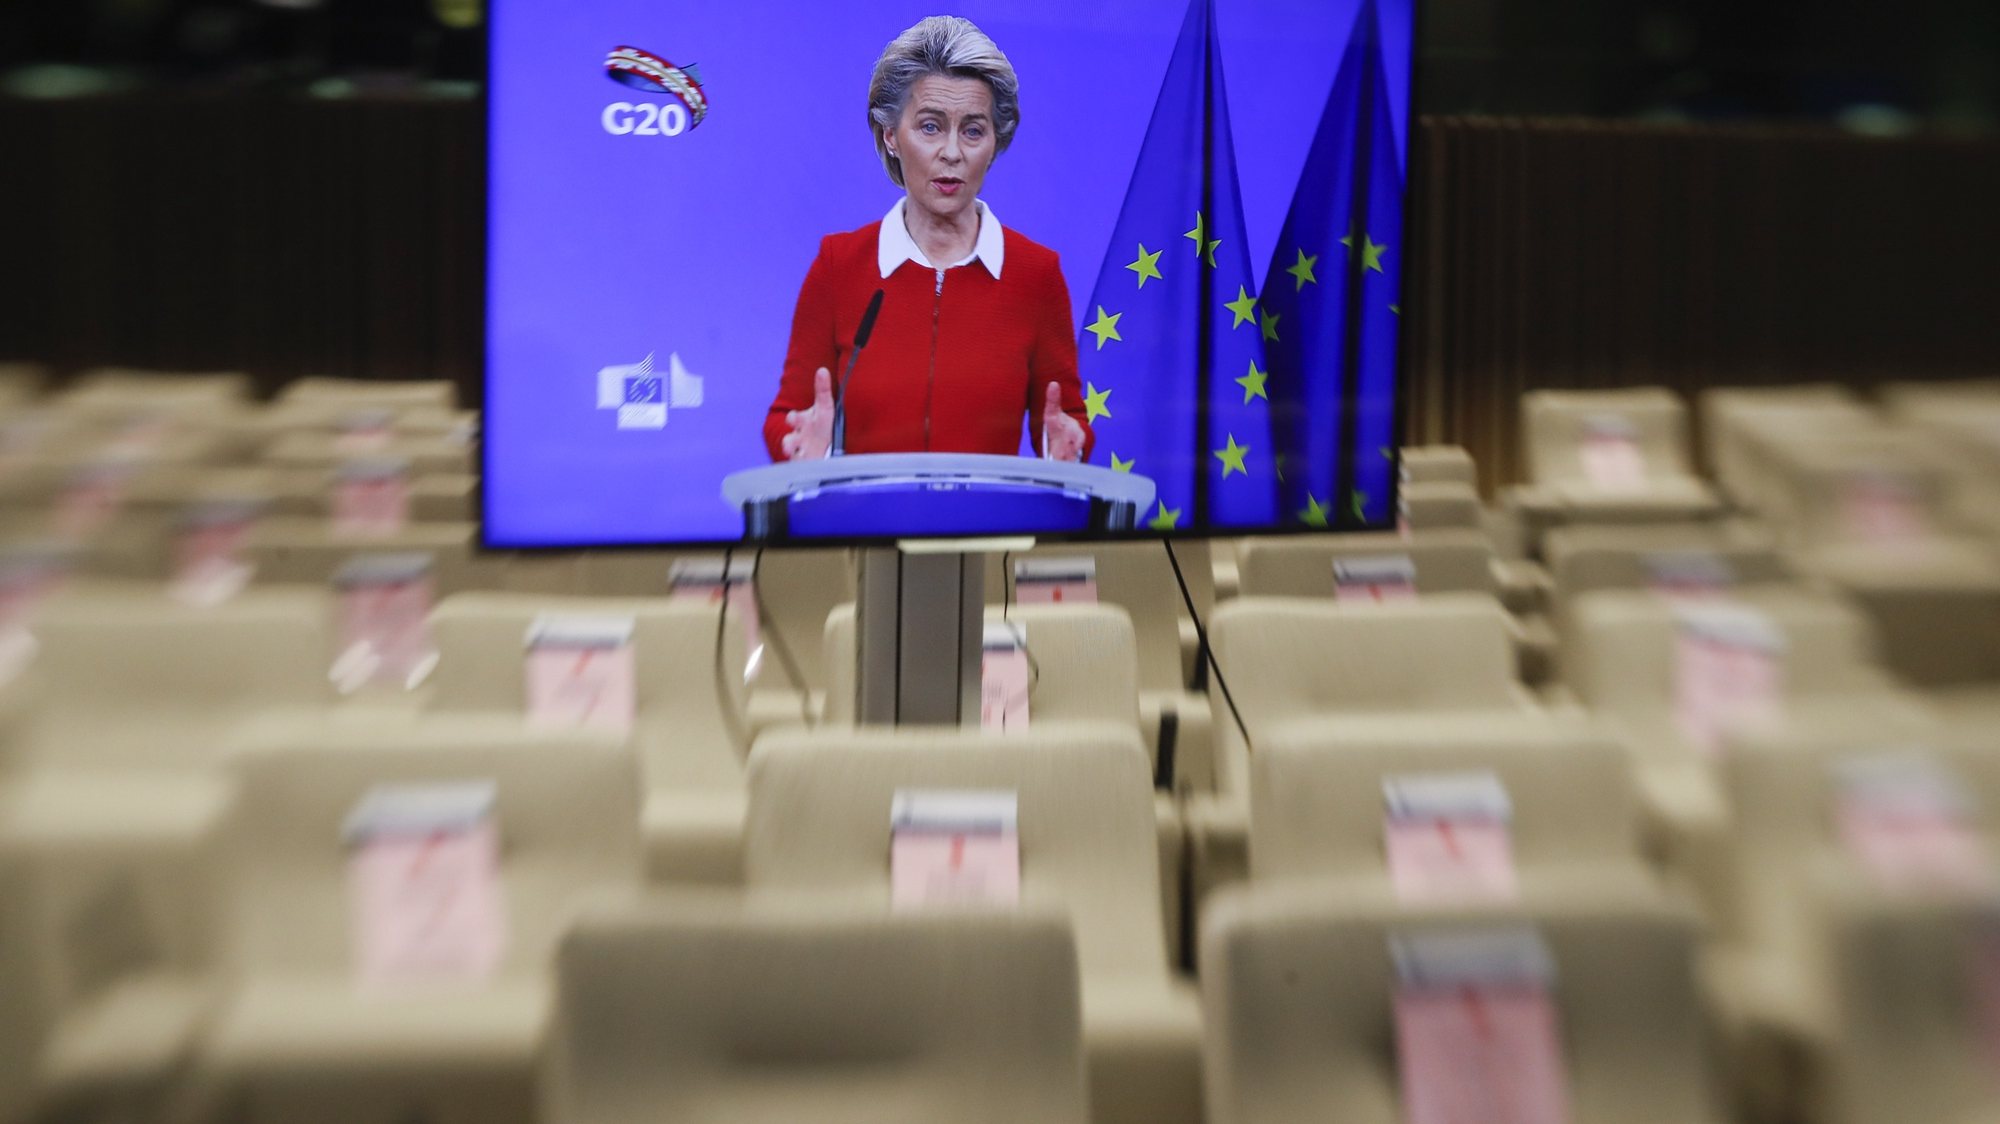 epa08830651 A tiltshift lens image of European Commission President Ursula Von Der Leyen seen on a screen as she along with European Council President Charles Michel (unseen) give a joint press briefing ahead of a G20 online meeting, in Brussels, Belgium, 20 November 2020. The G20 Leaders’ Summit will be held virtually on 21 and 22 November and is organized by Saudi Arabia&#039;s current G20 Presidency.  EPA/OLIVIER HOSLET / POOL